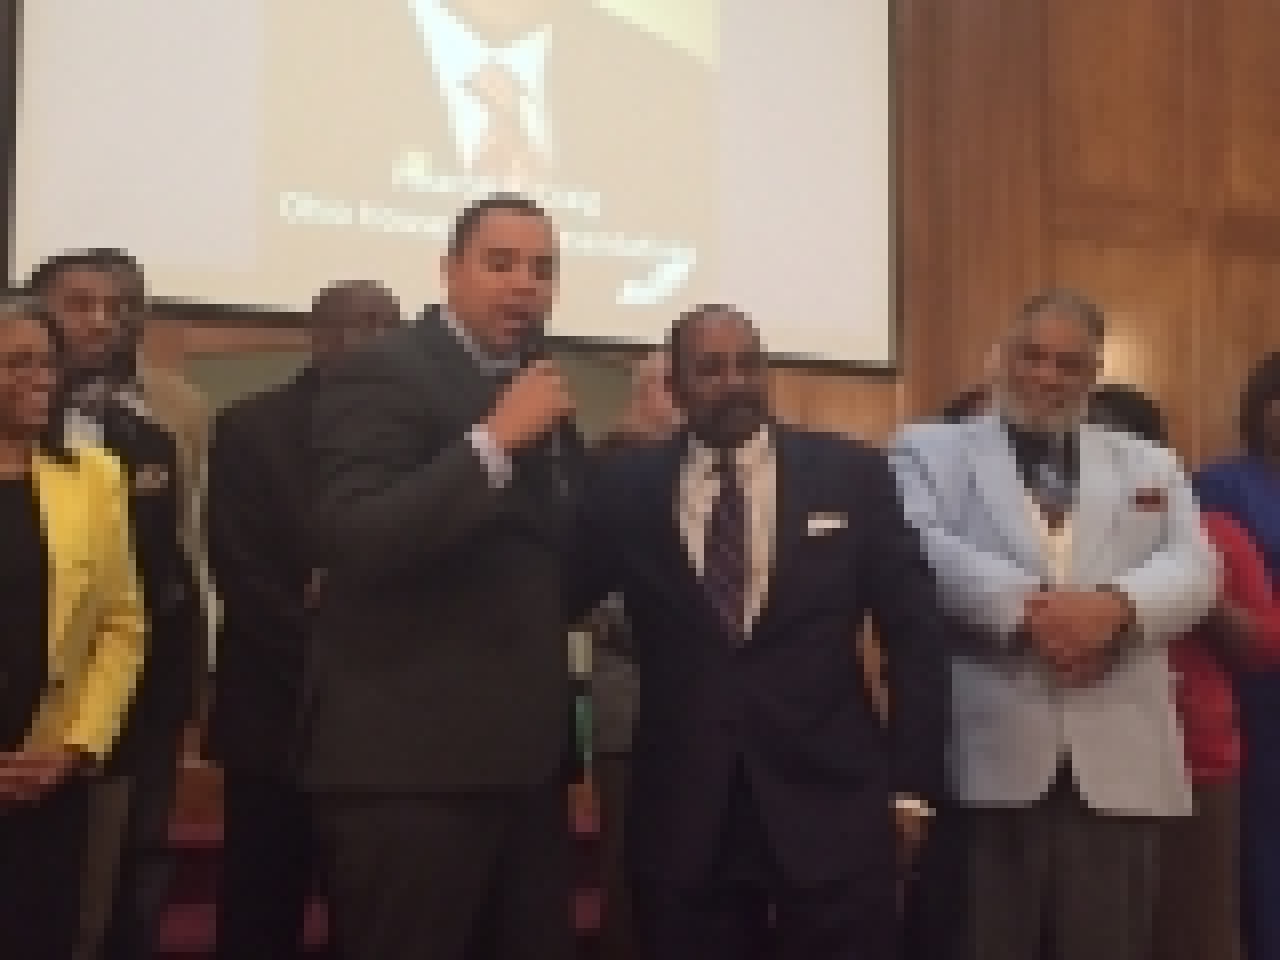 Rep. Hearcel Craig recognized as a leader in the advancement of the African American community